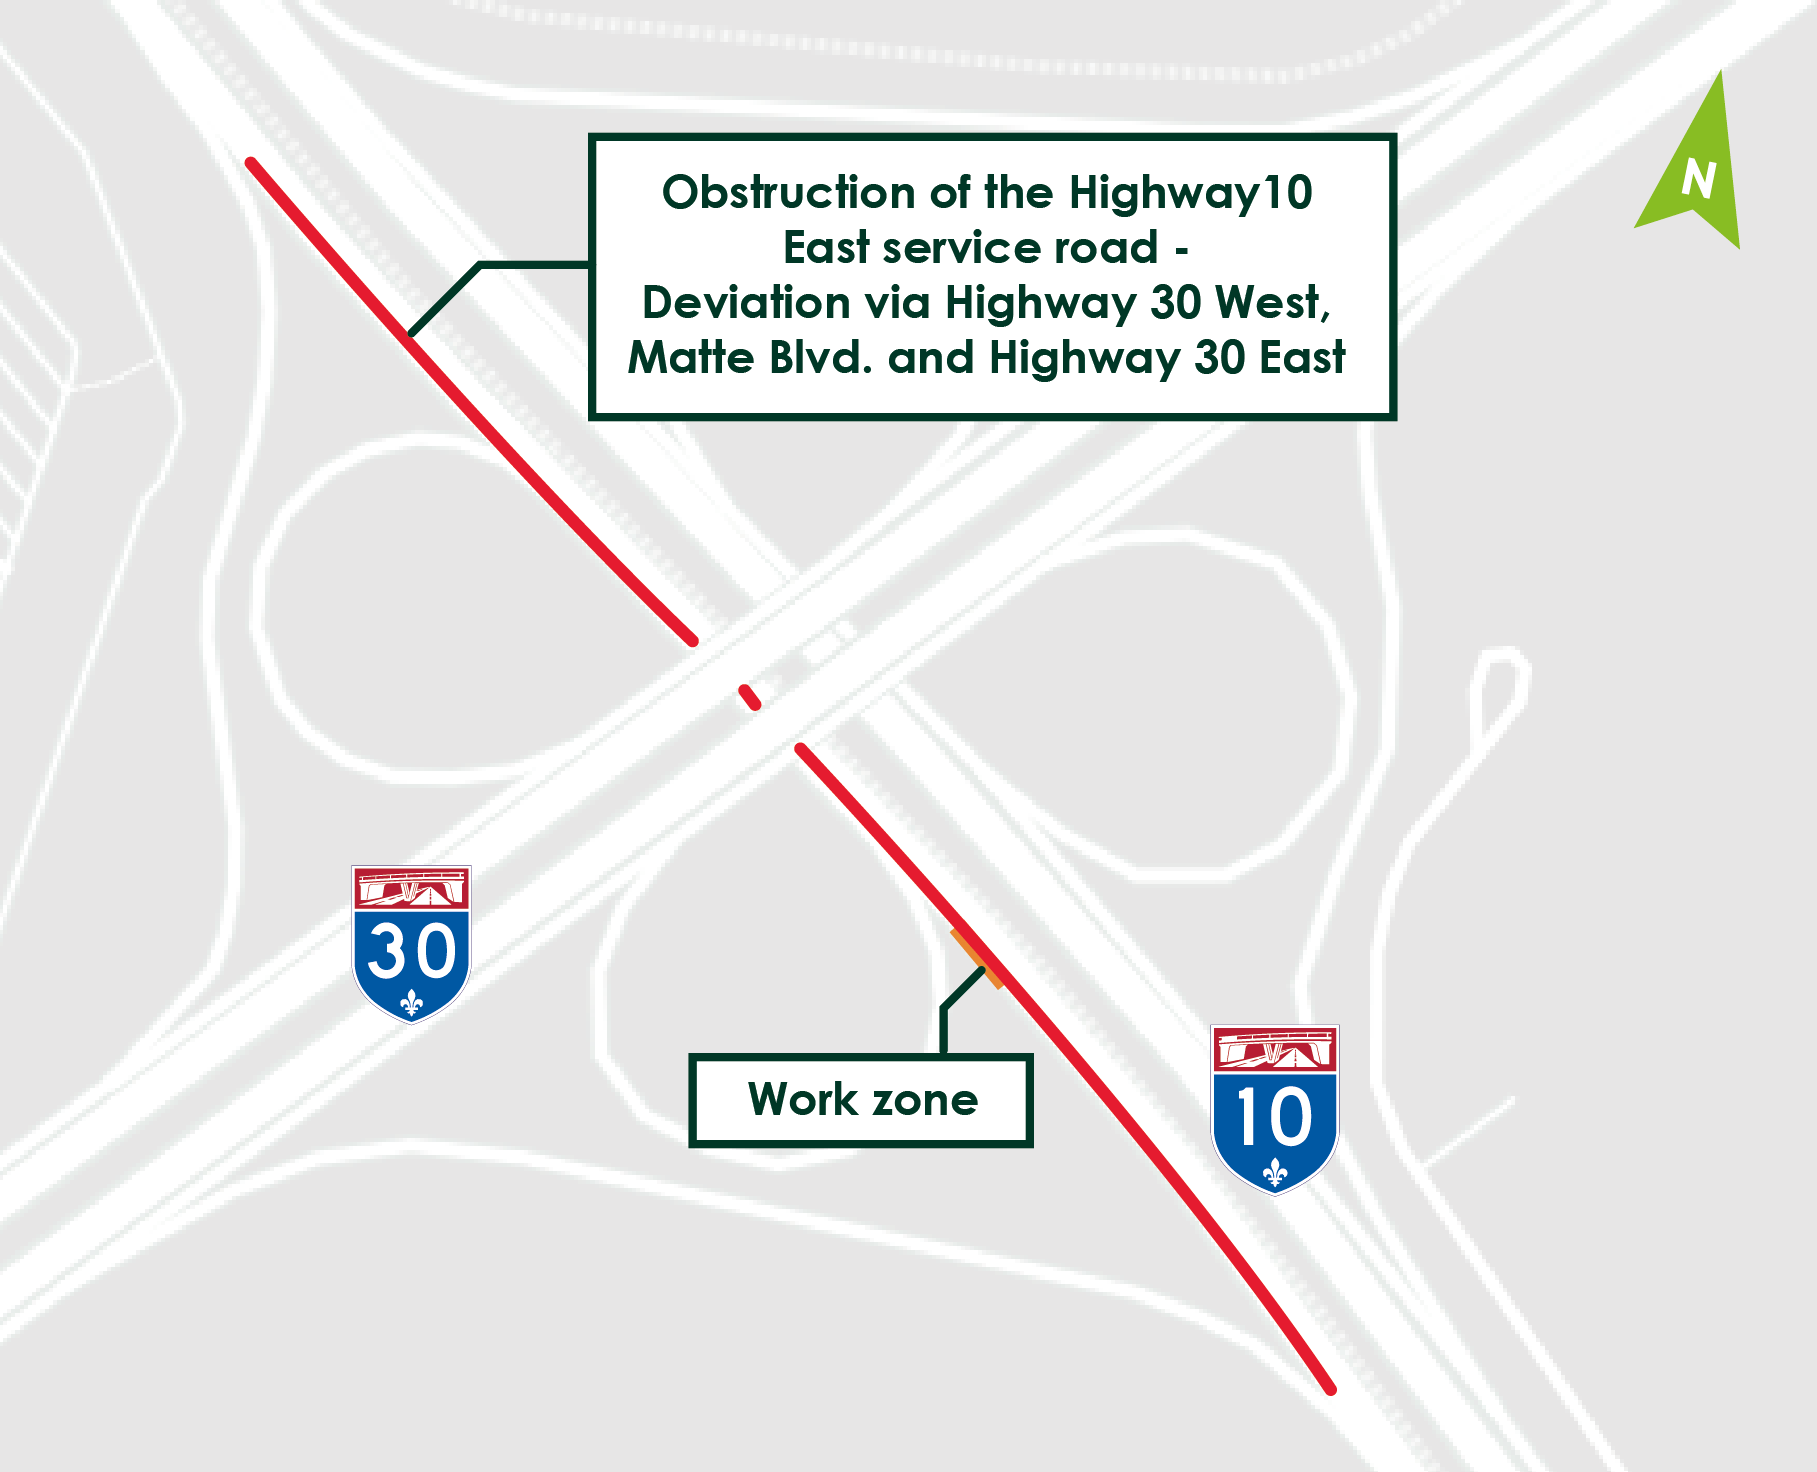 Map of the Highway 10 East service road obstruction that will take place starting May 2.